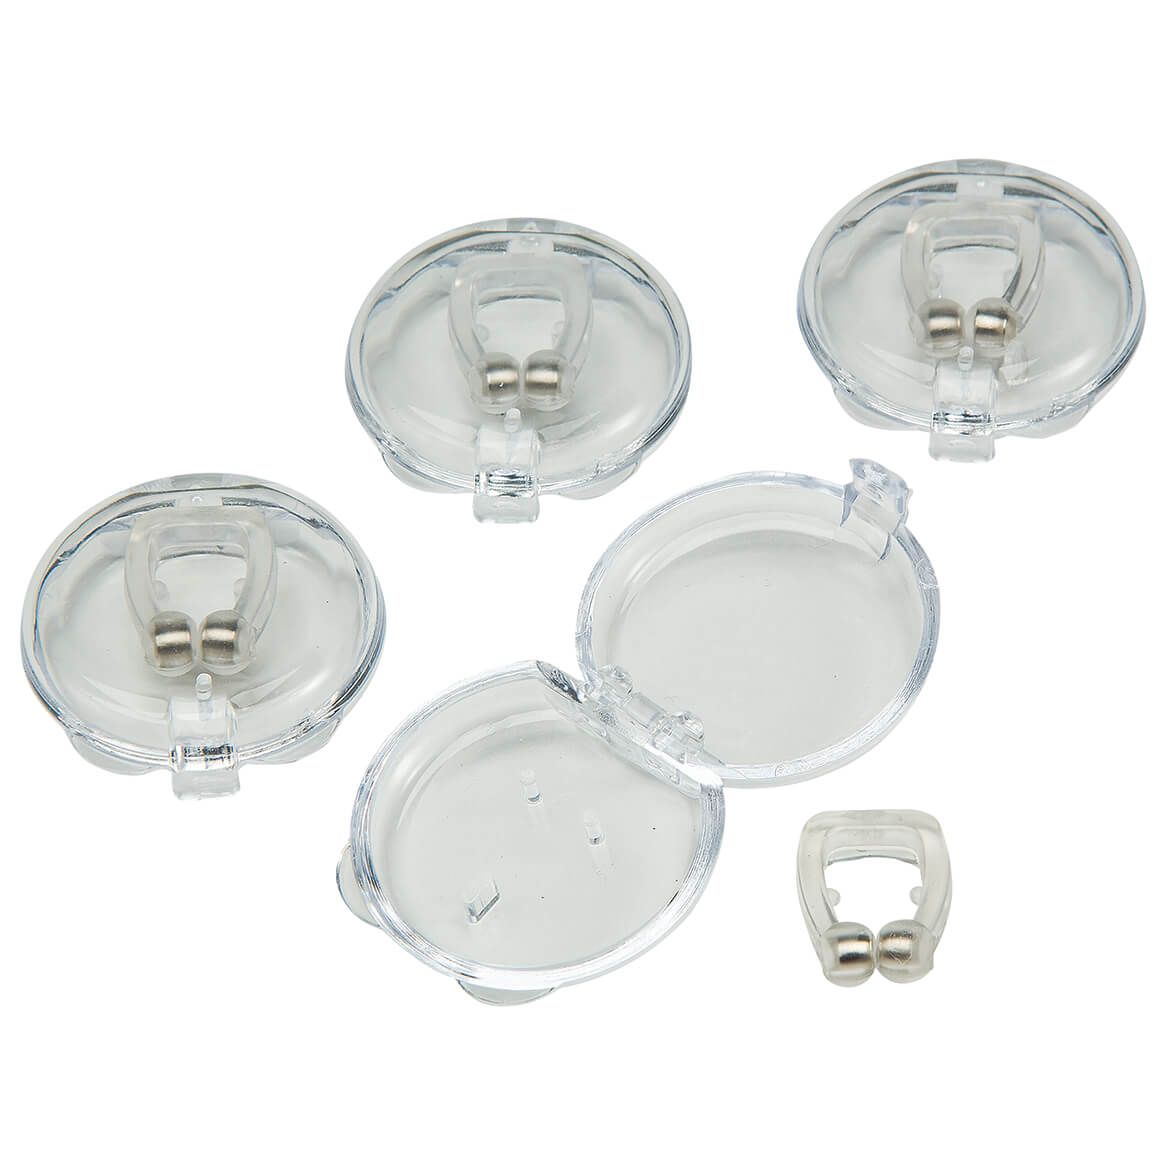 Anti-Snore Magnetic Clips, Set of 4 + '-' + 375841